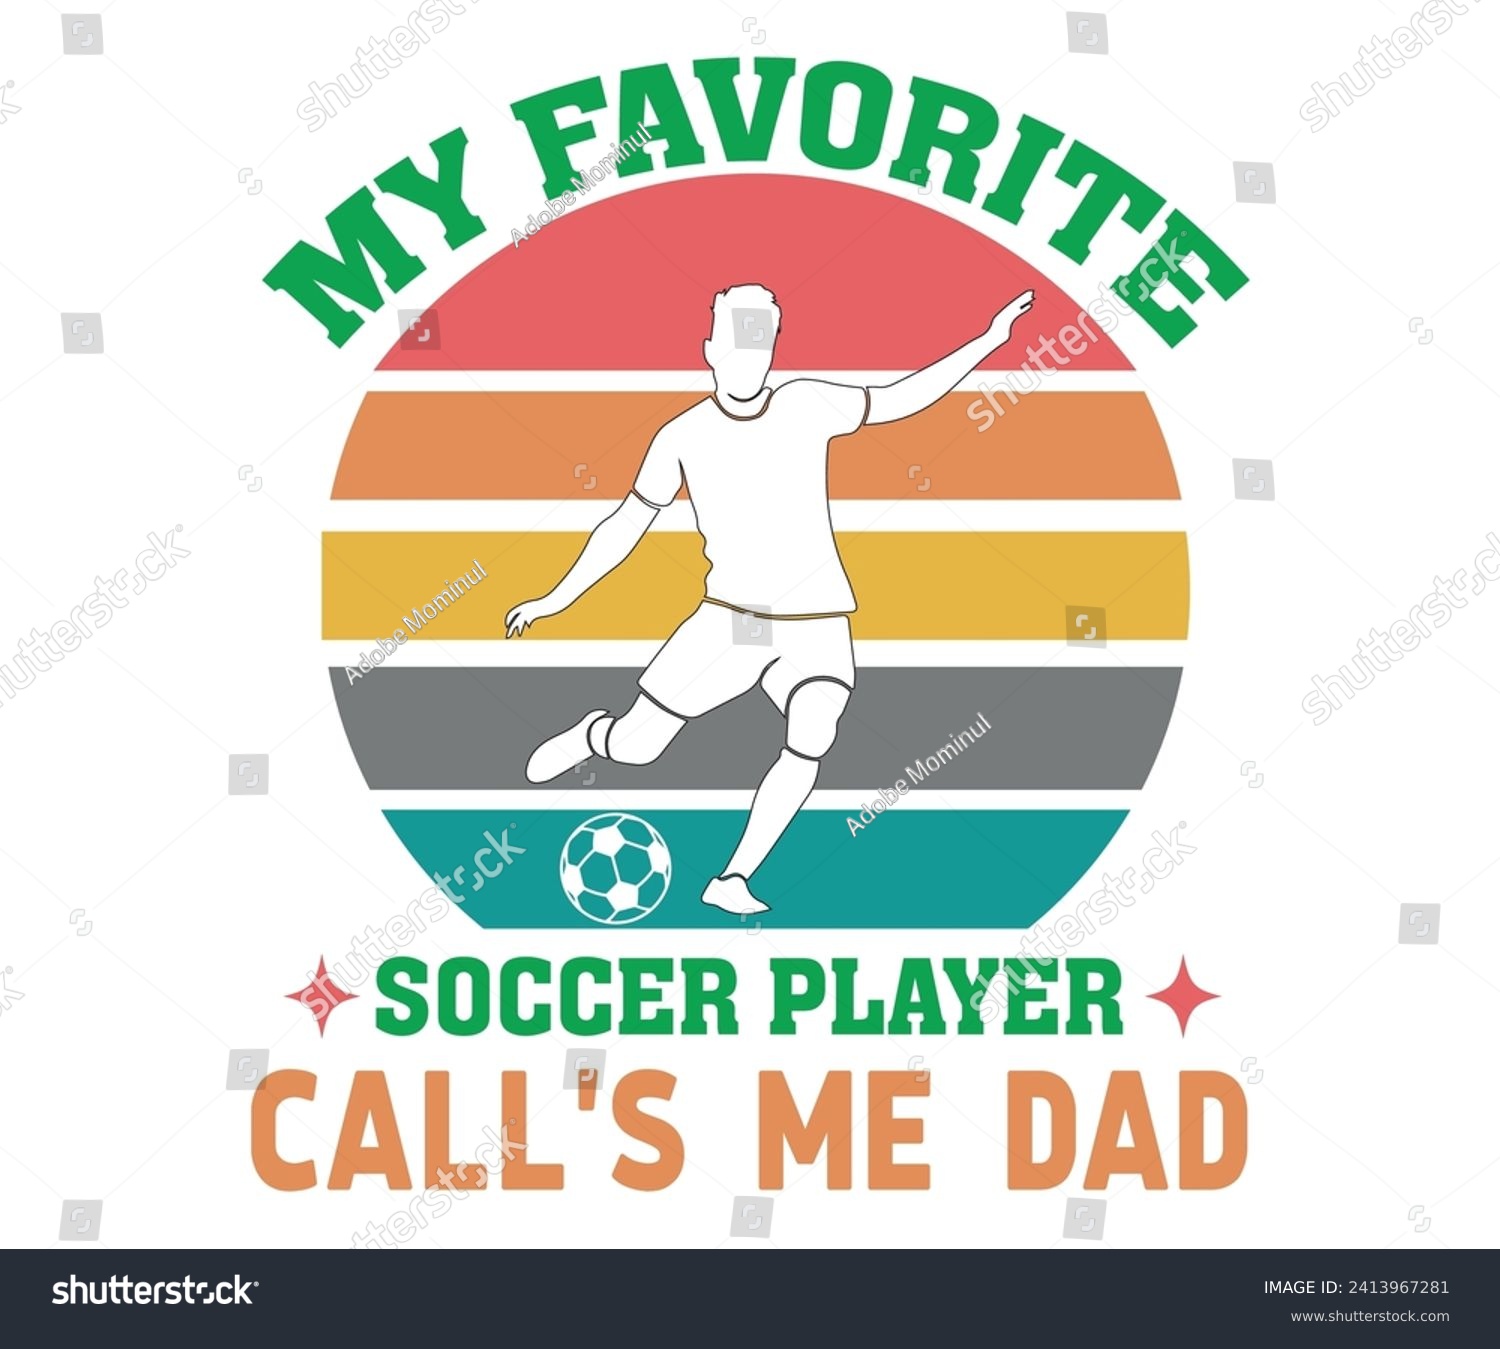 SVG of My Favorite Soccer Player Call's Me Dad,Soccer Svg,Soccer Quote Svg,Retro,Soccer Mom Shirt,Funny Shirt,Soccar Player Shirt,Game Day Shirt,Gift For Soccer,Dad of Soccer,Soccer Mascot,Soccer Football, svg